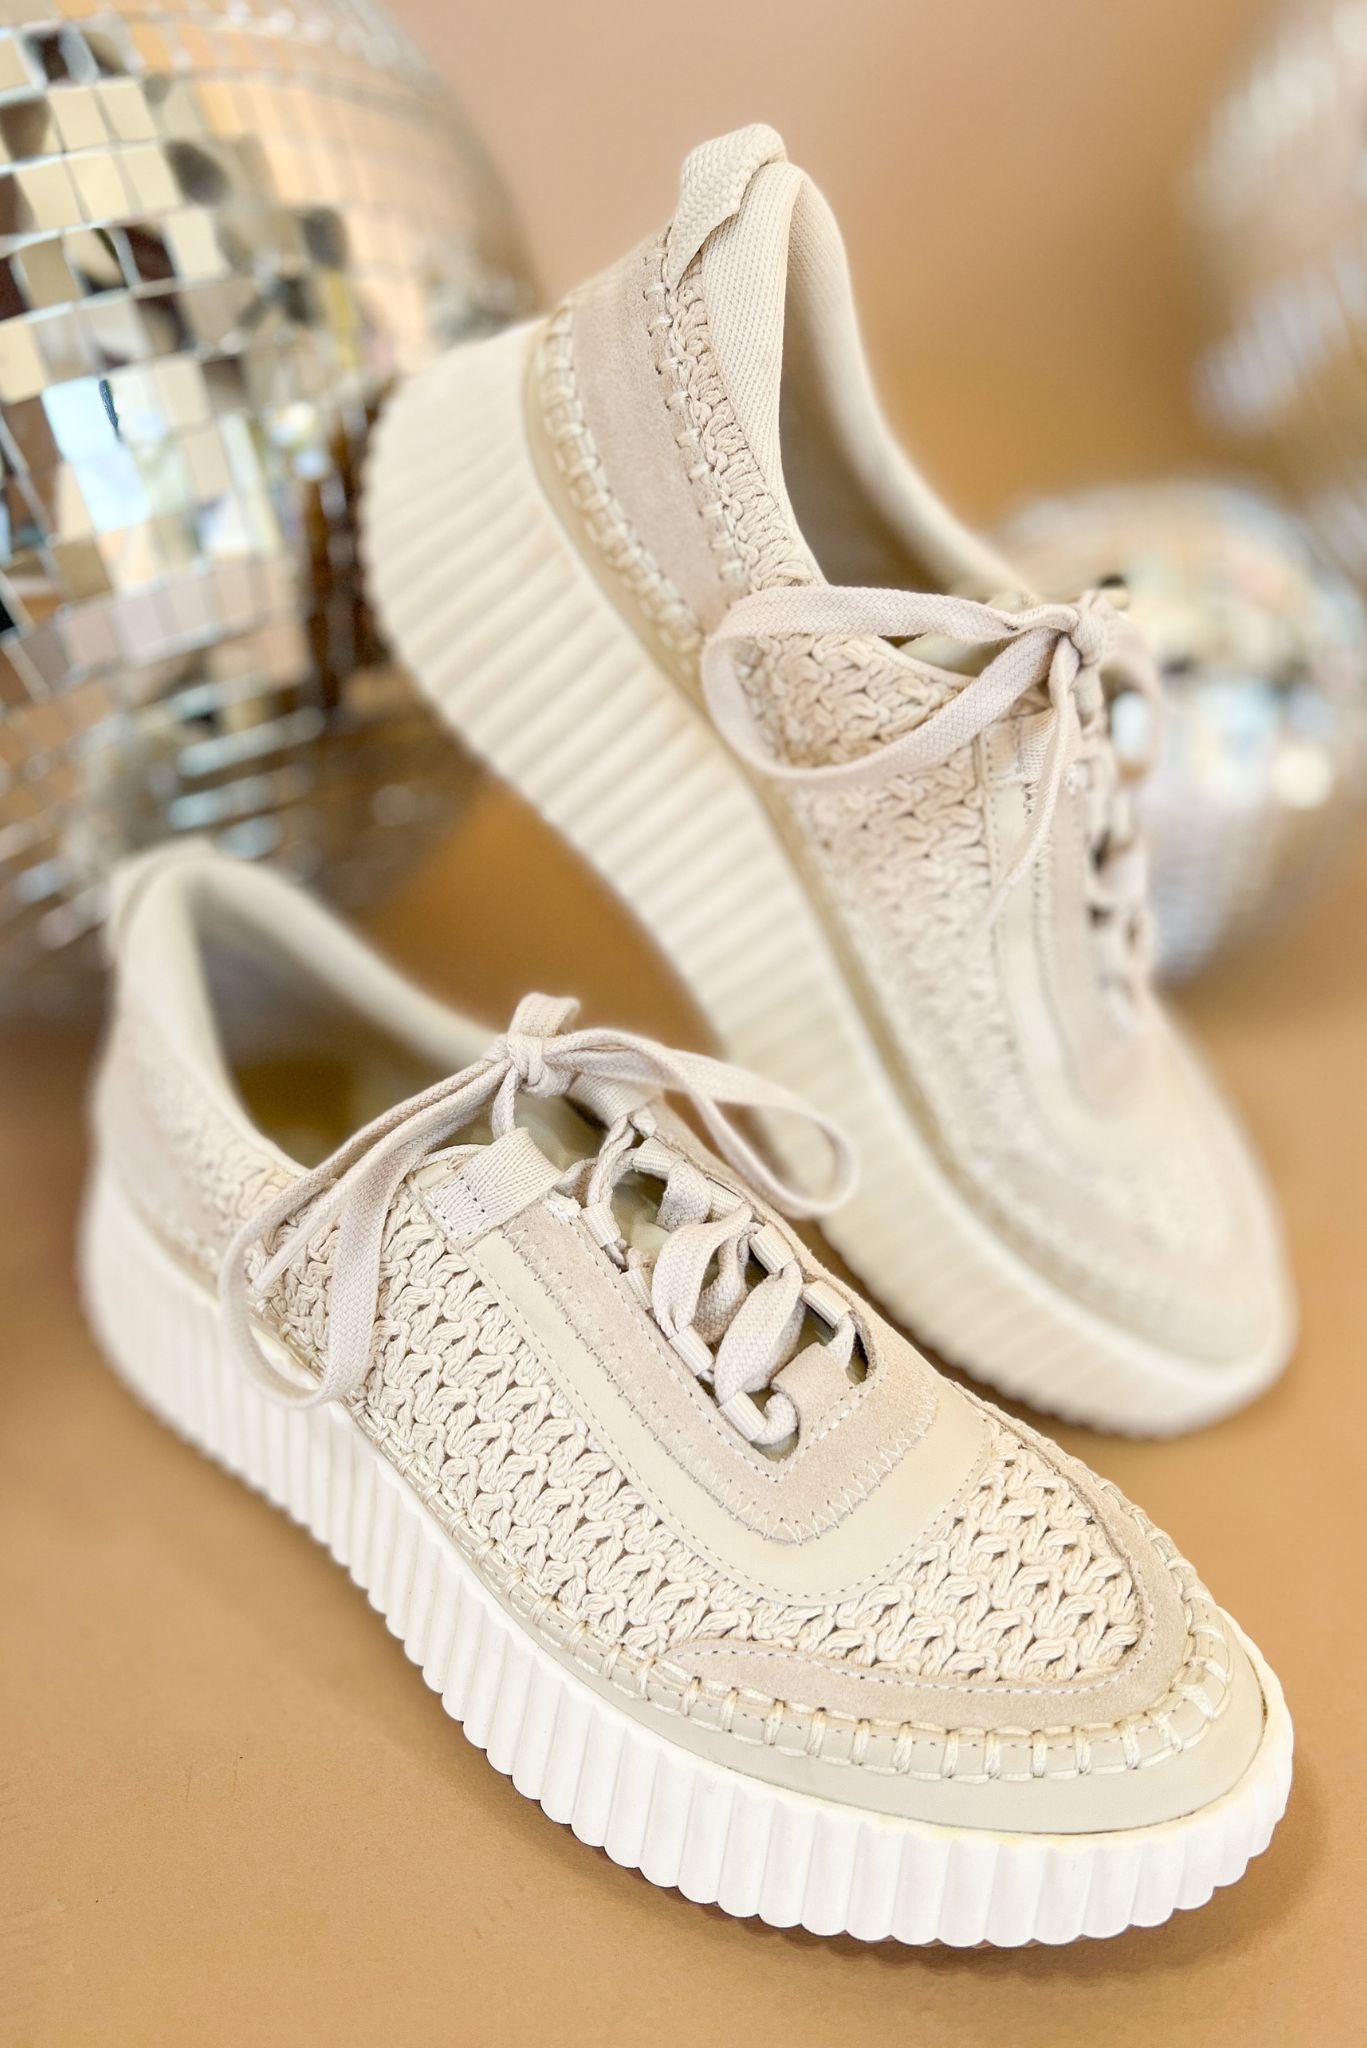 Dolce Vita Sand Knit Platform Sneakers, must have, everyday wear, designer dupe, mom style, chic, shop style your senses by mallory fitzsimmons